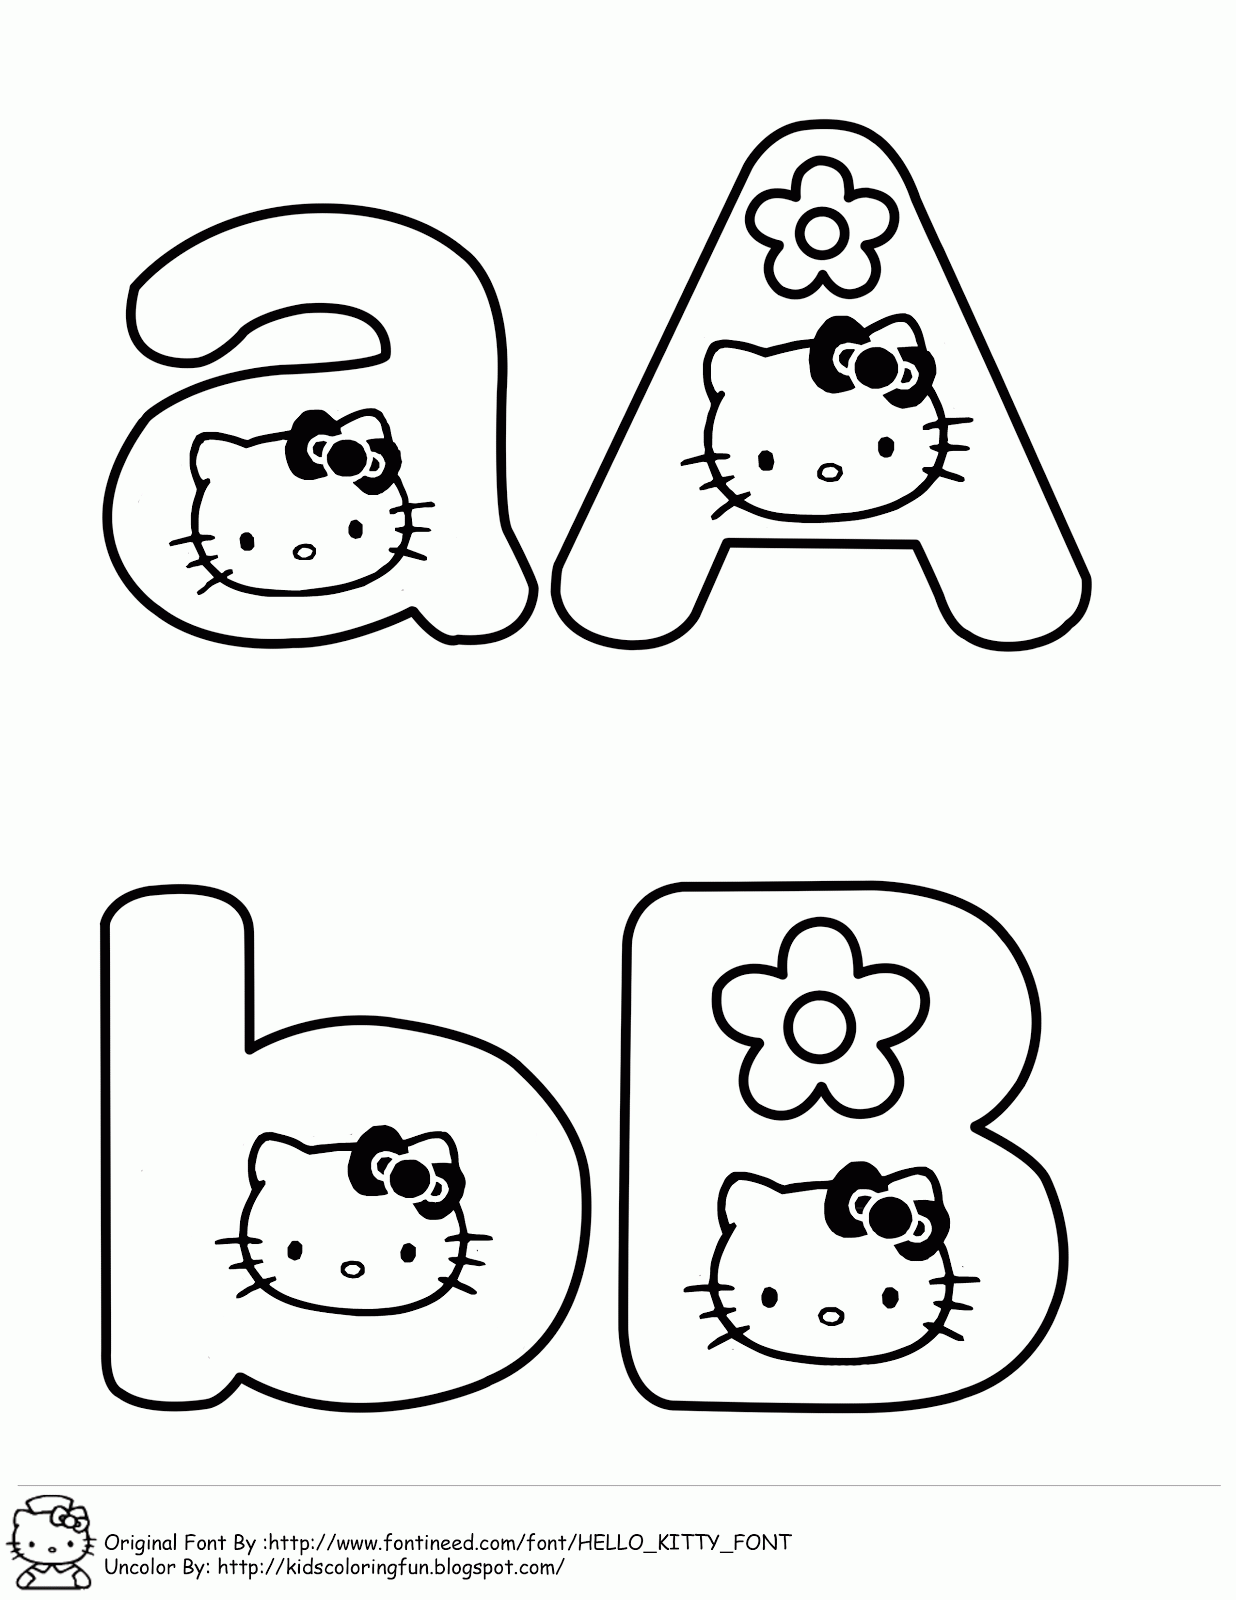 Learning ABC With Hello Kitty | Fantasy Coloring Pages